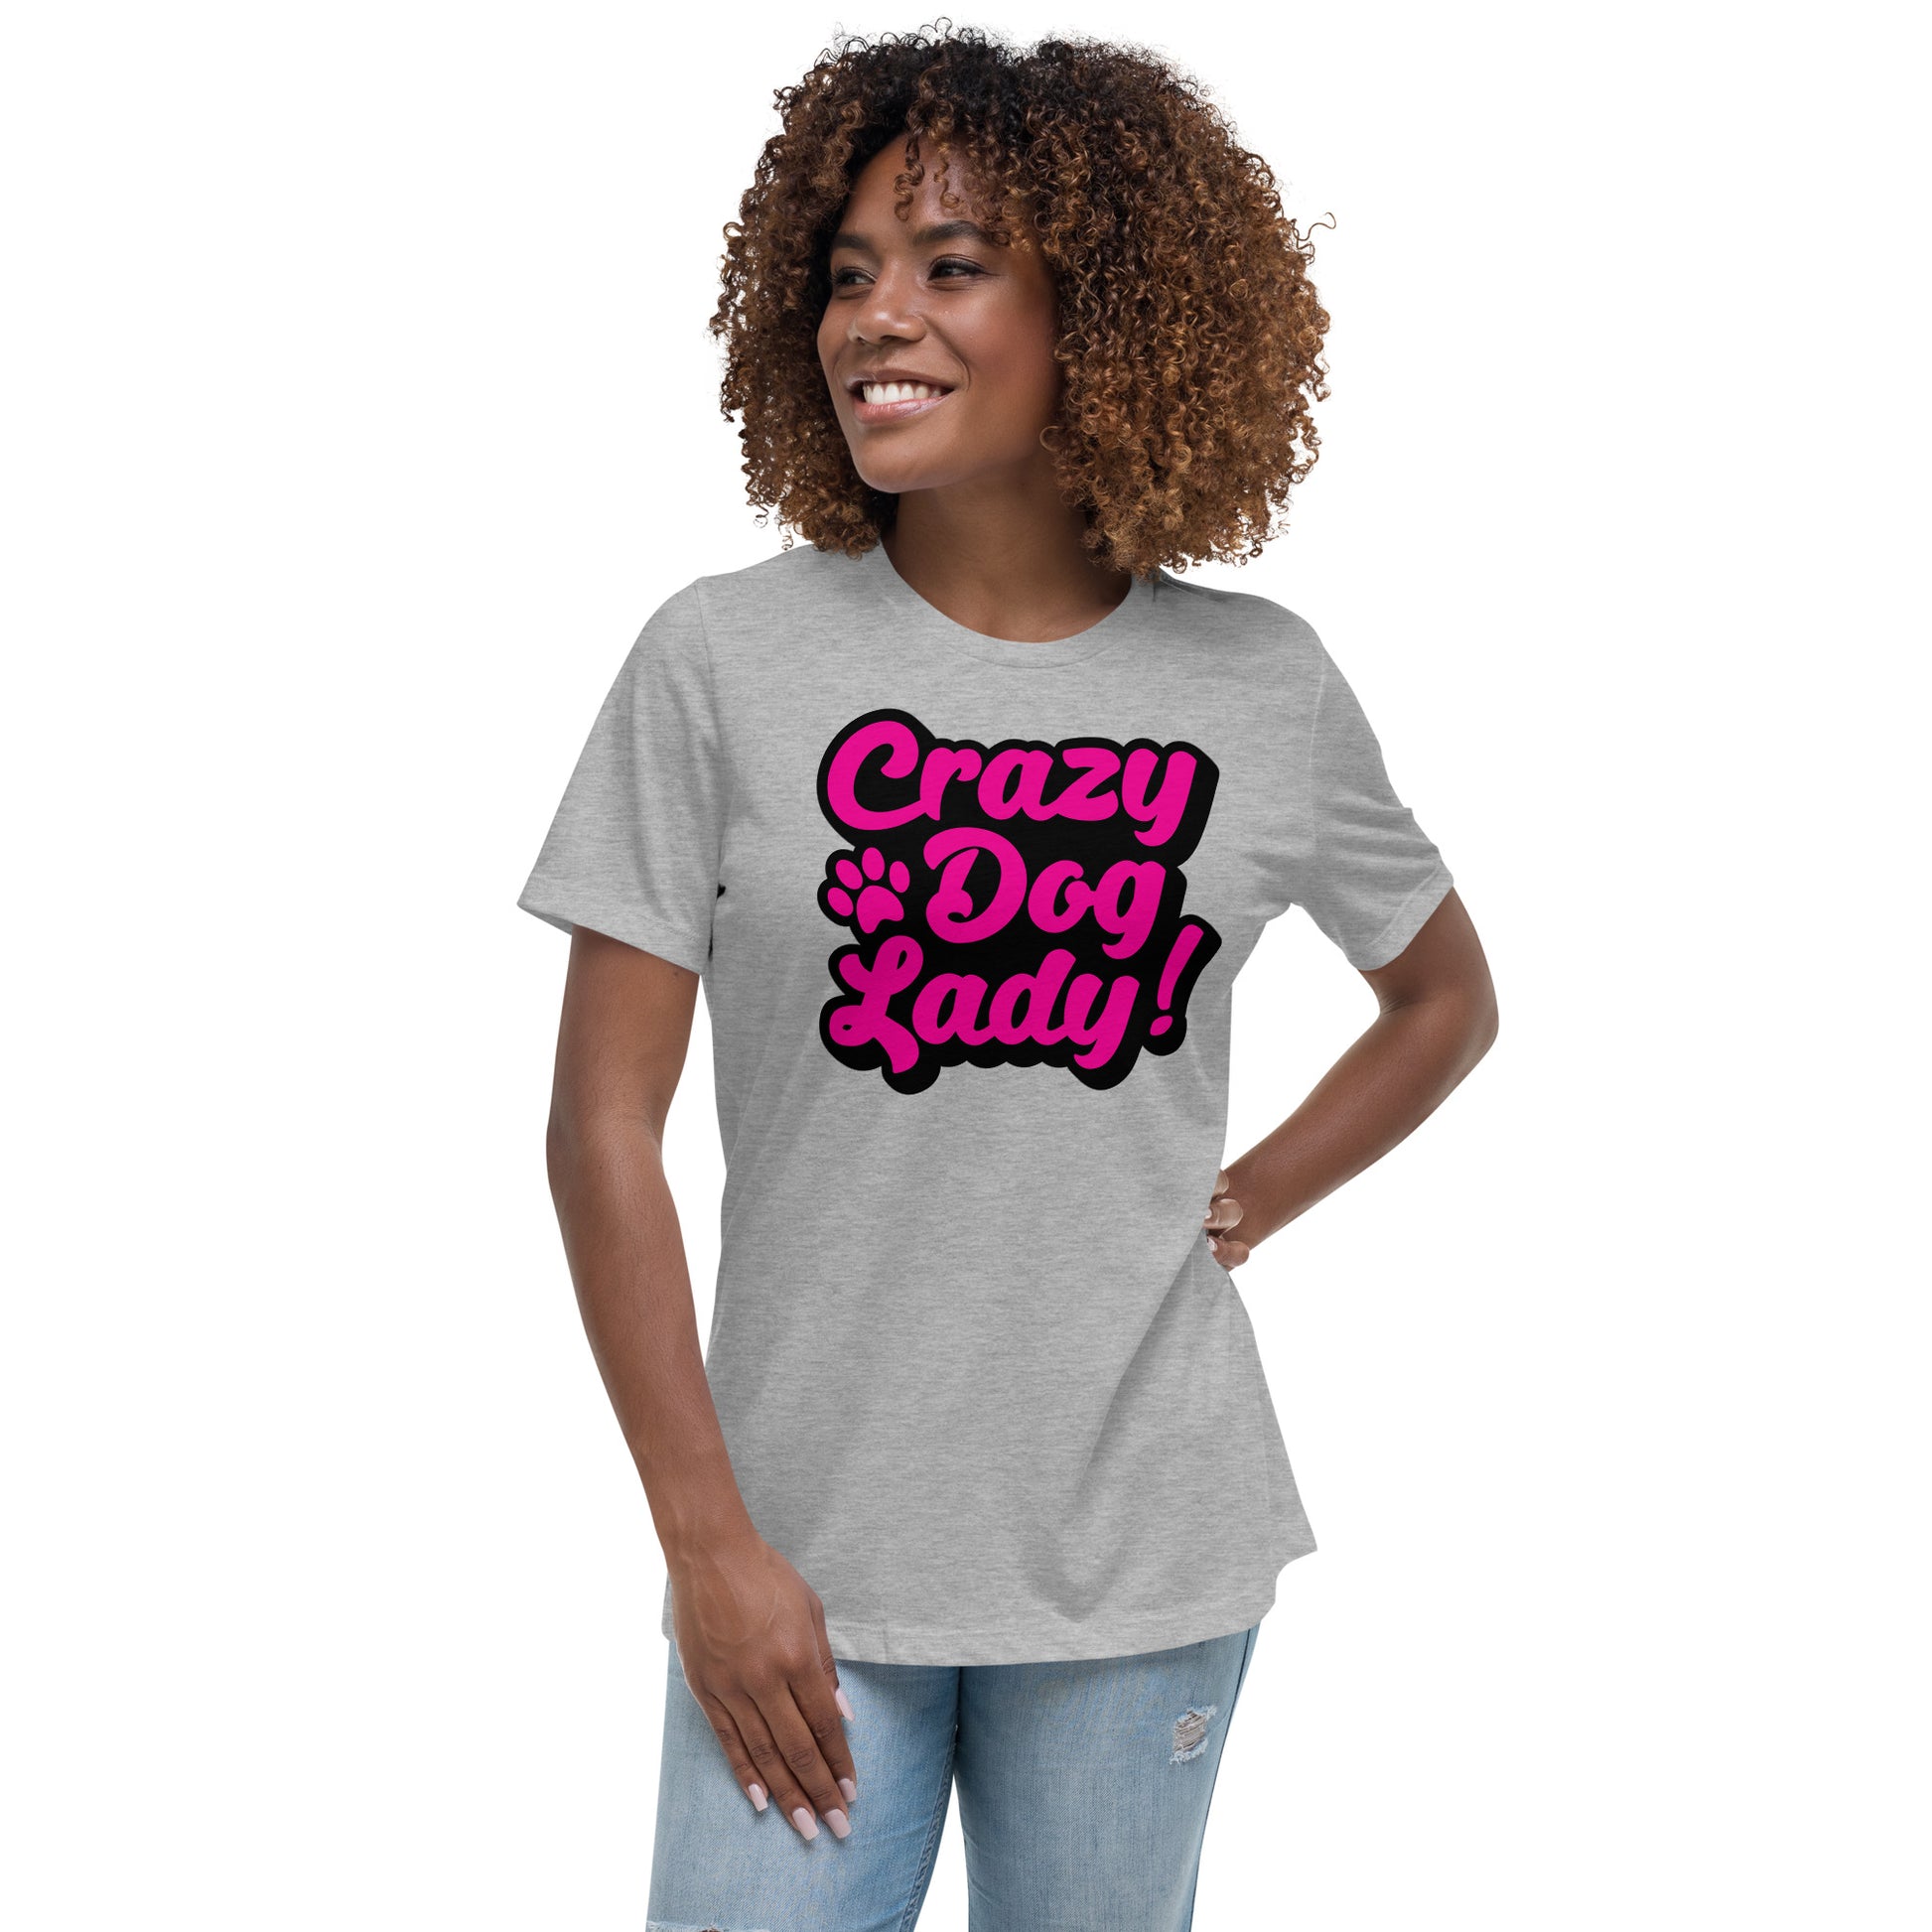 Crazy Dog Lady Women's Athletic Heather T-Shirt by Dog Artistry 